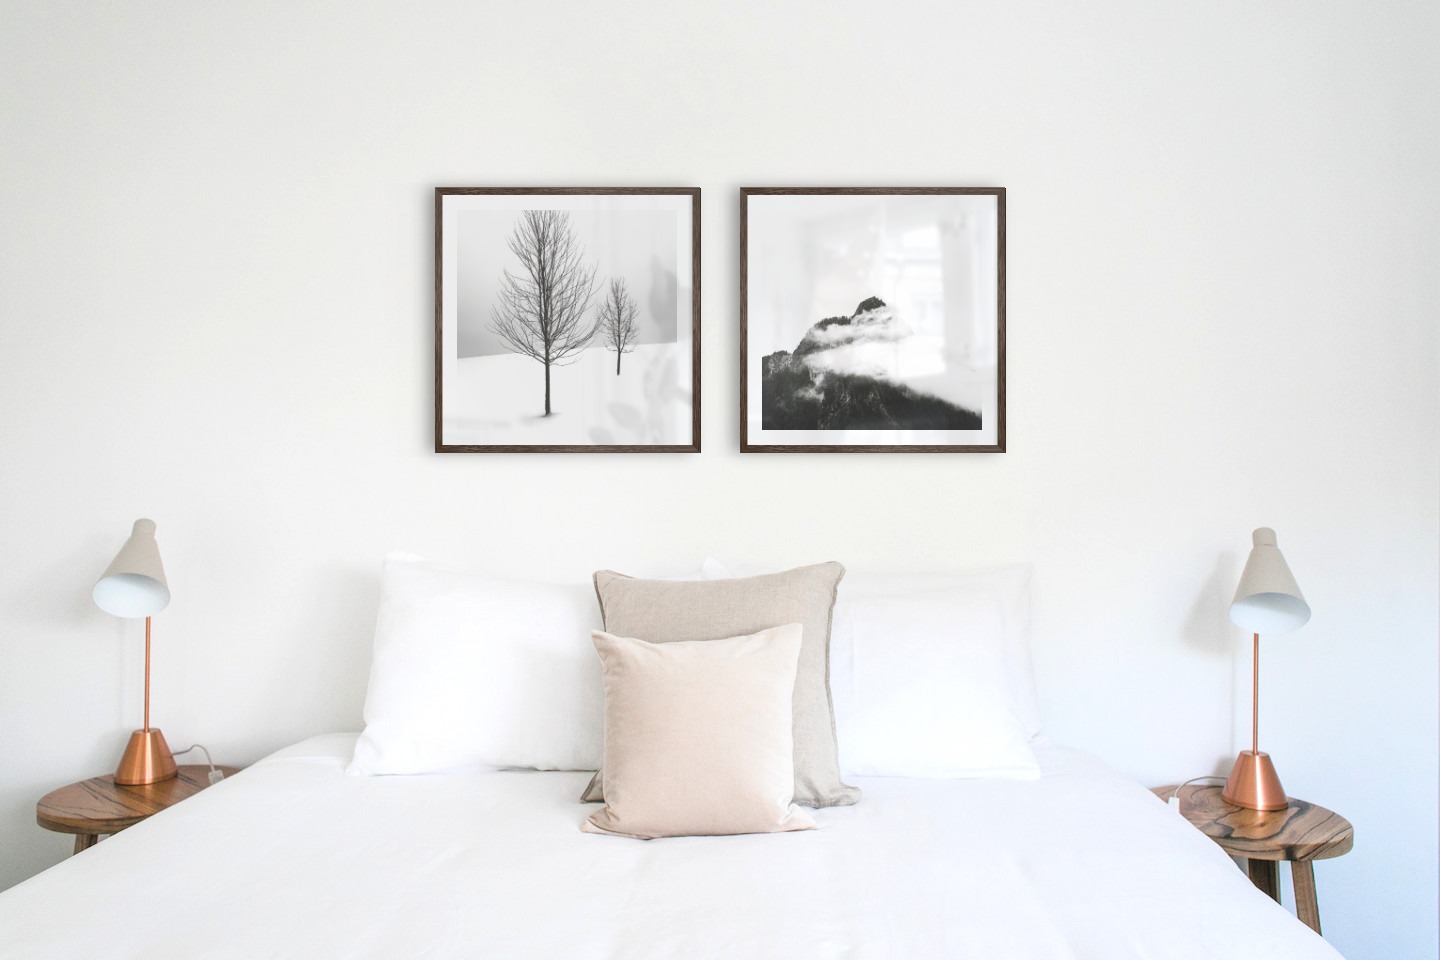 Gallery wall with picture frames in dark wood in sizes 50x50 with prints "Trees in the snow" and "Mountain peaks in fog"